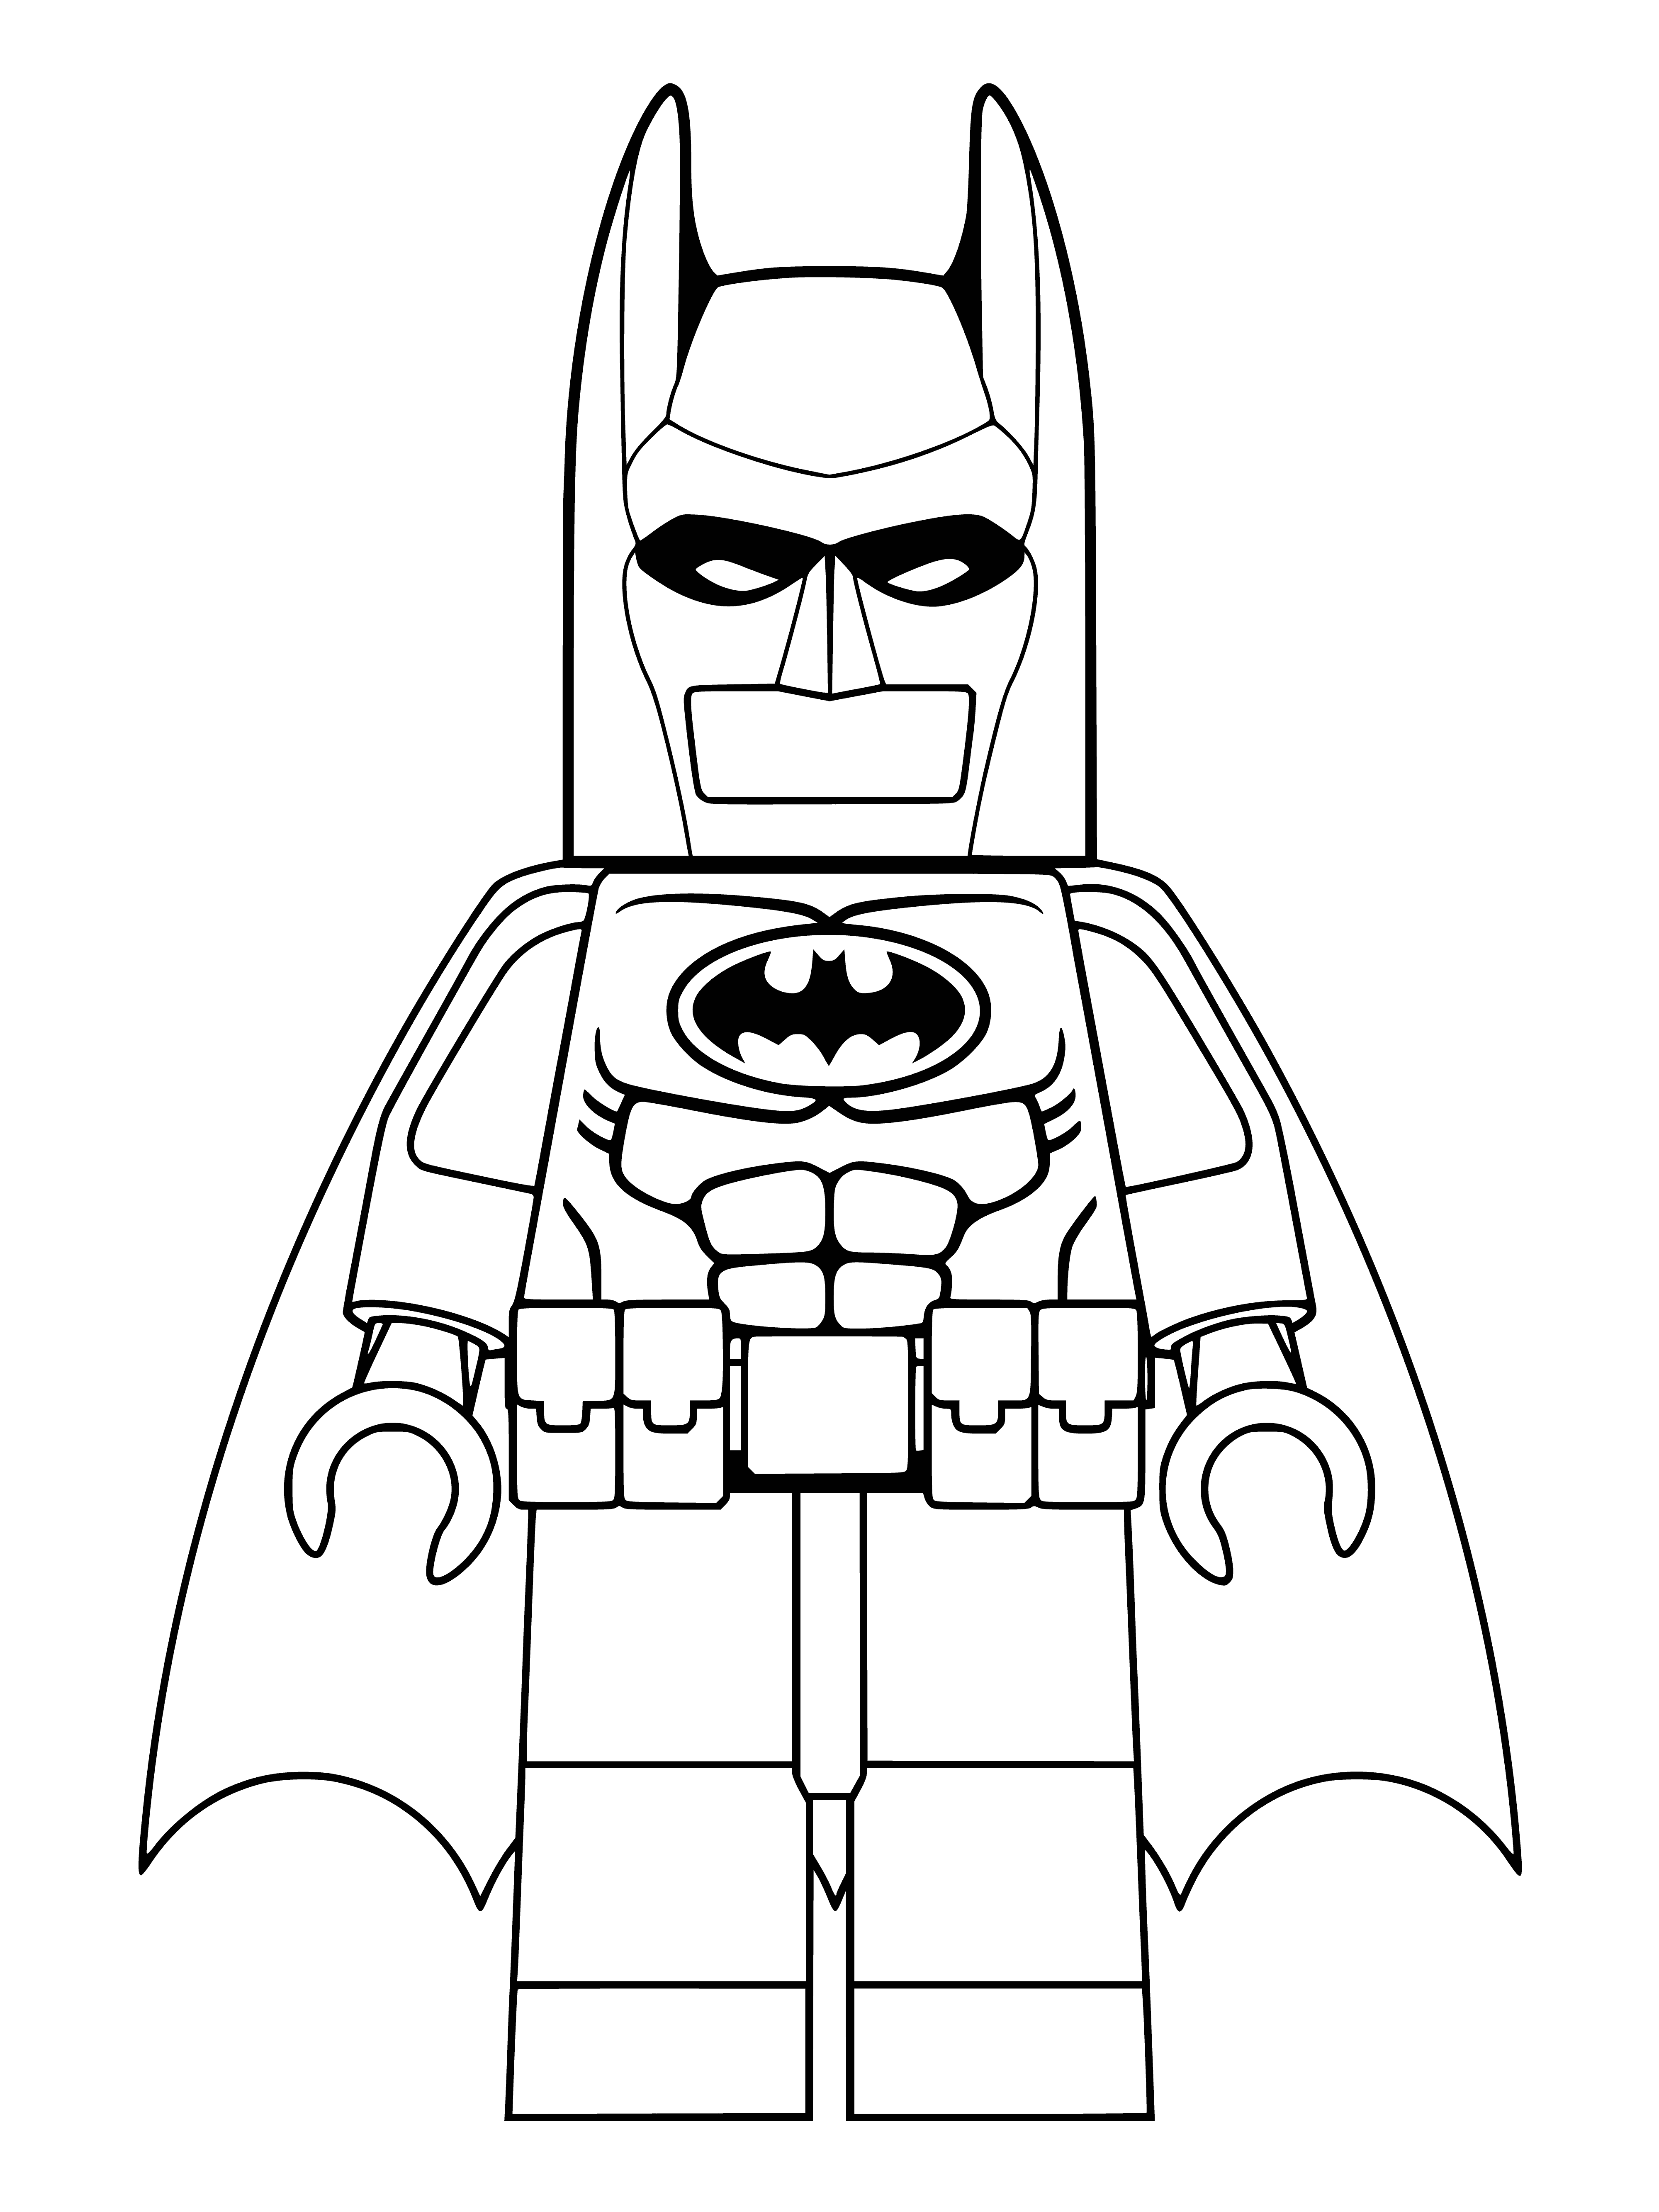 coloring page: Lego Batman with black cape holds batarang in center, flanked by a large green plant and orange/white Lego figure. #thecapedcrusader